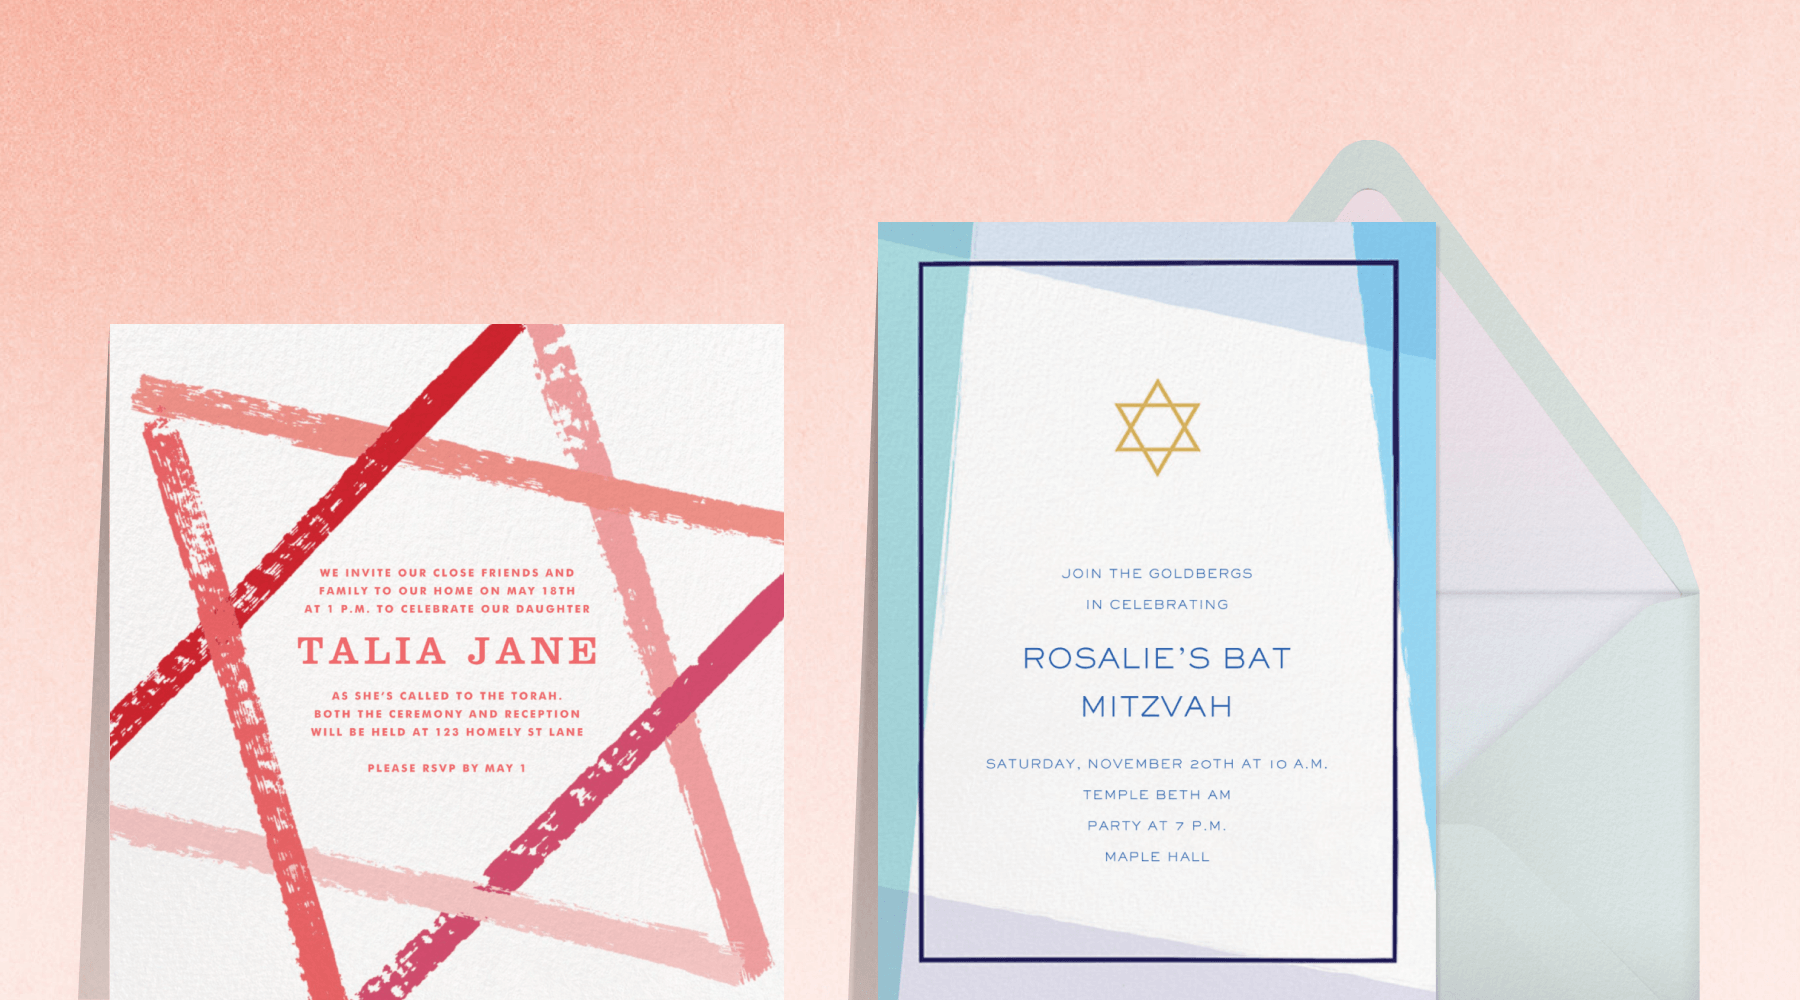 A square invitation with a large pink Star of David design; an invitation with an abstract blue border and a small gold Star of David.